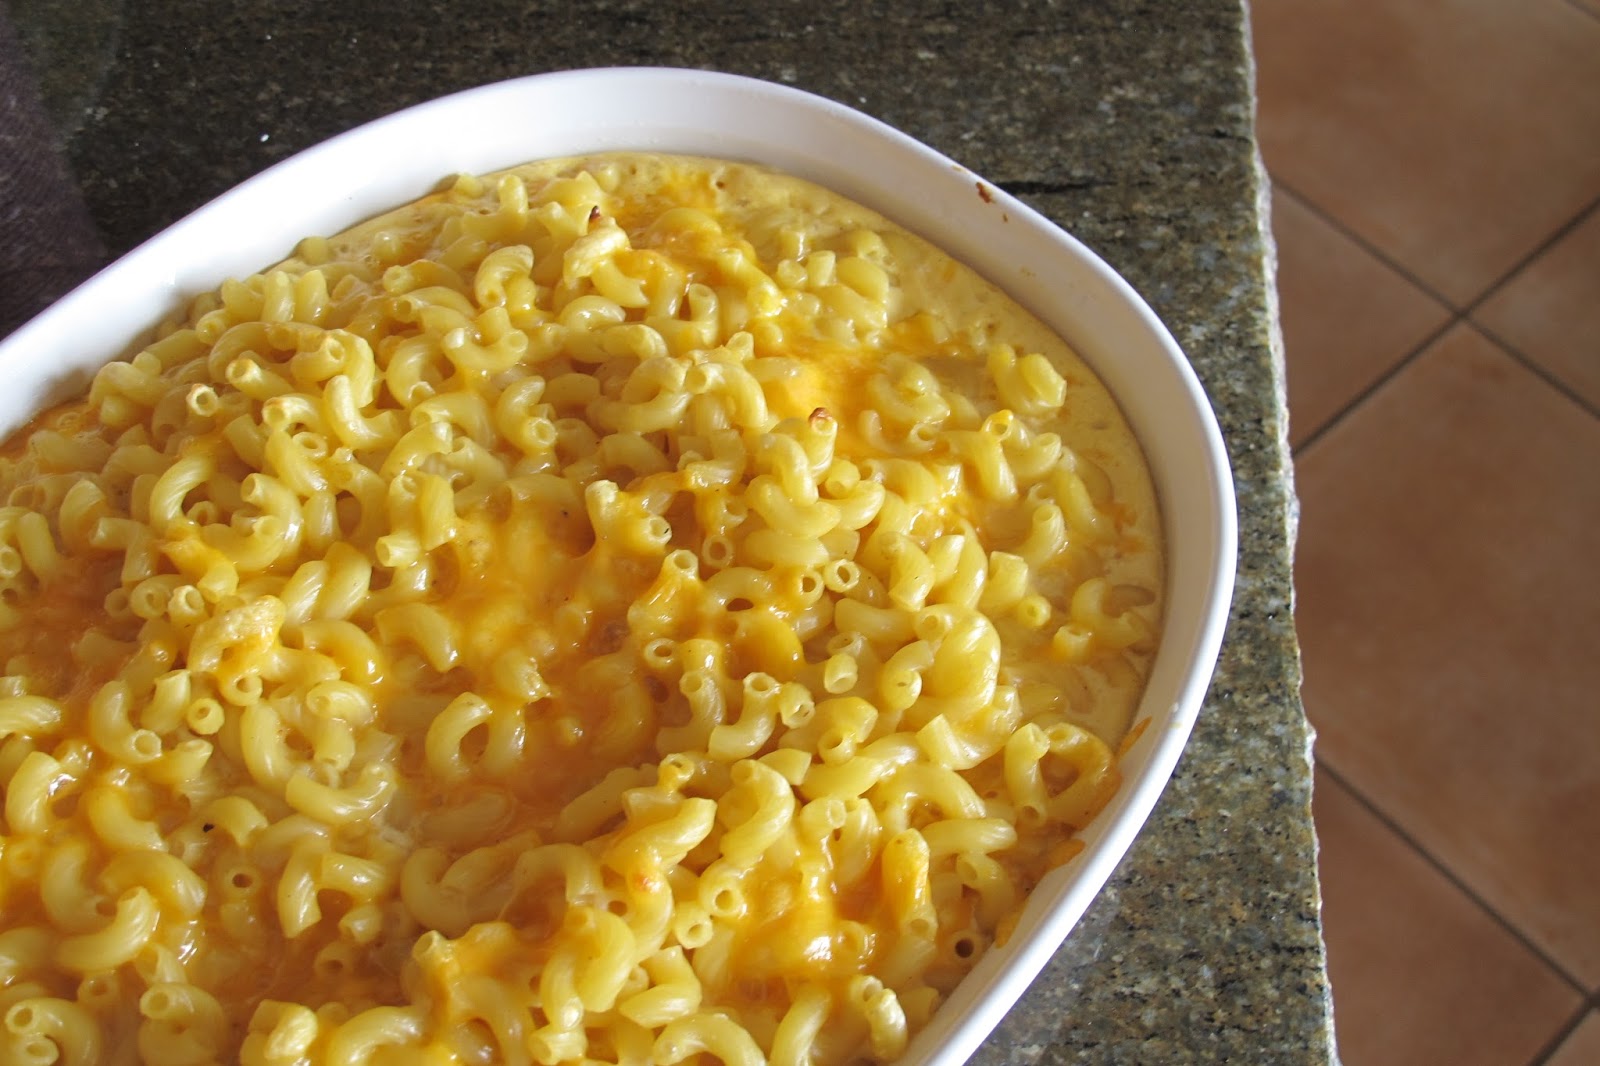 Laura's Culinary Adventures: Nigella Lawson's Mac and Cheese How To Fix Stringy Mac And Cheese